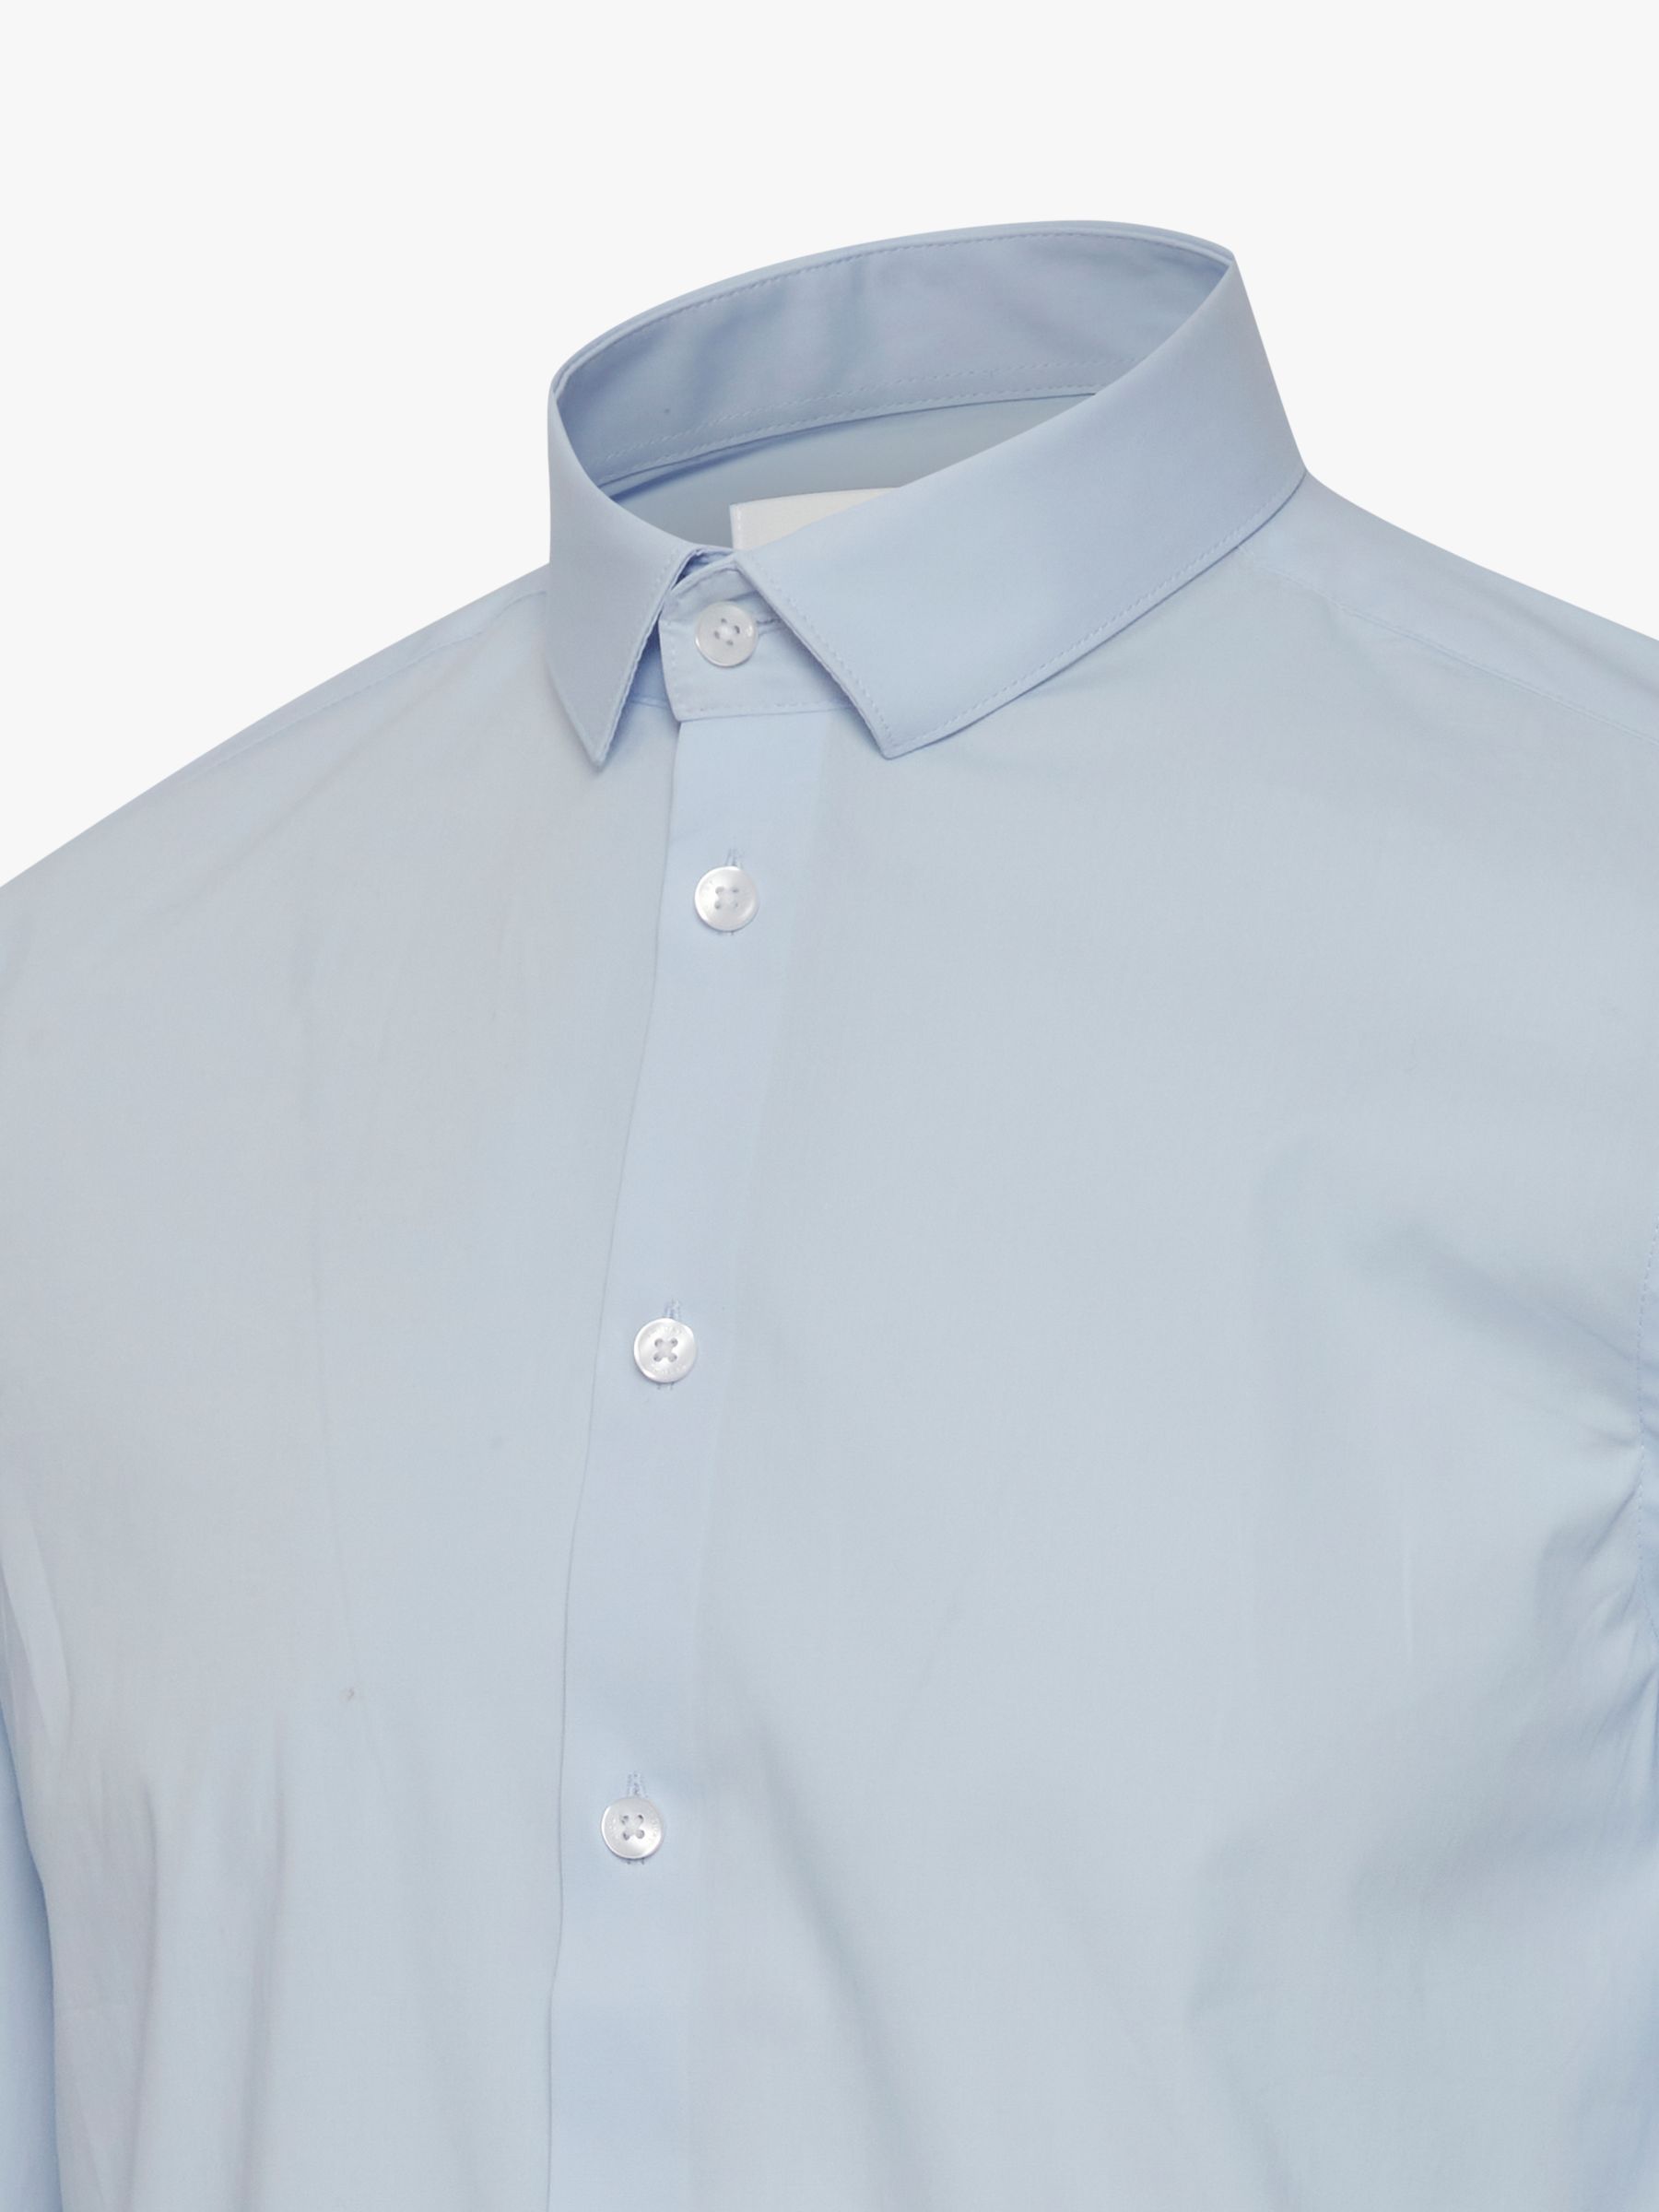 Casual Friday Palle Slim Fit Stretch Long Sleeve Shirt, Pale Blue, S